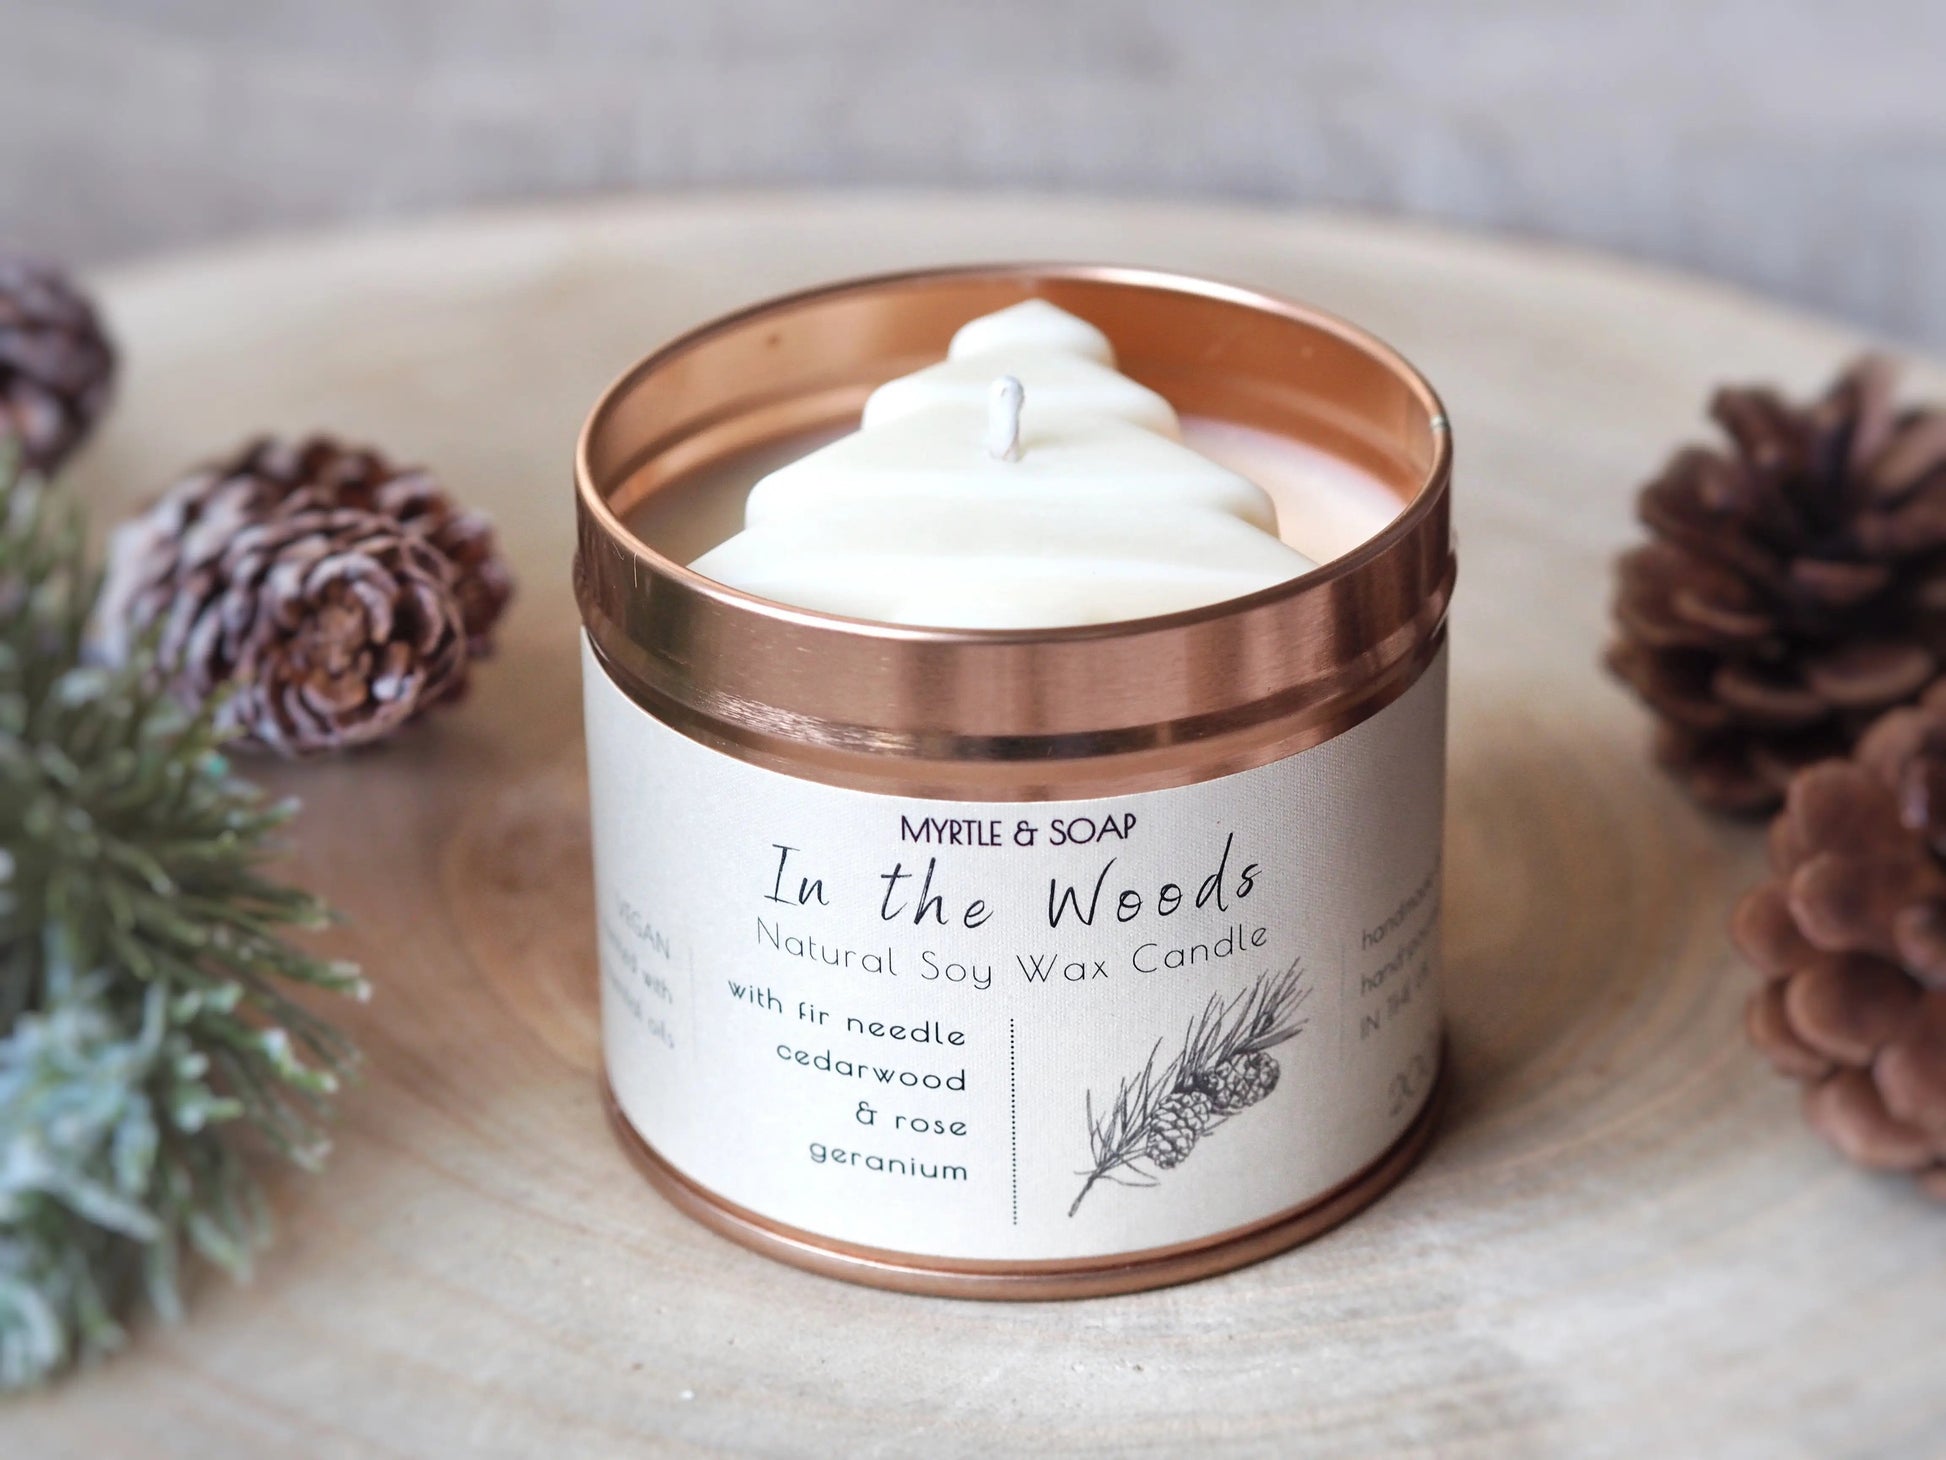 Myrtle & Soap In the Woods Natural Soy Wax Candle